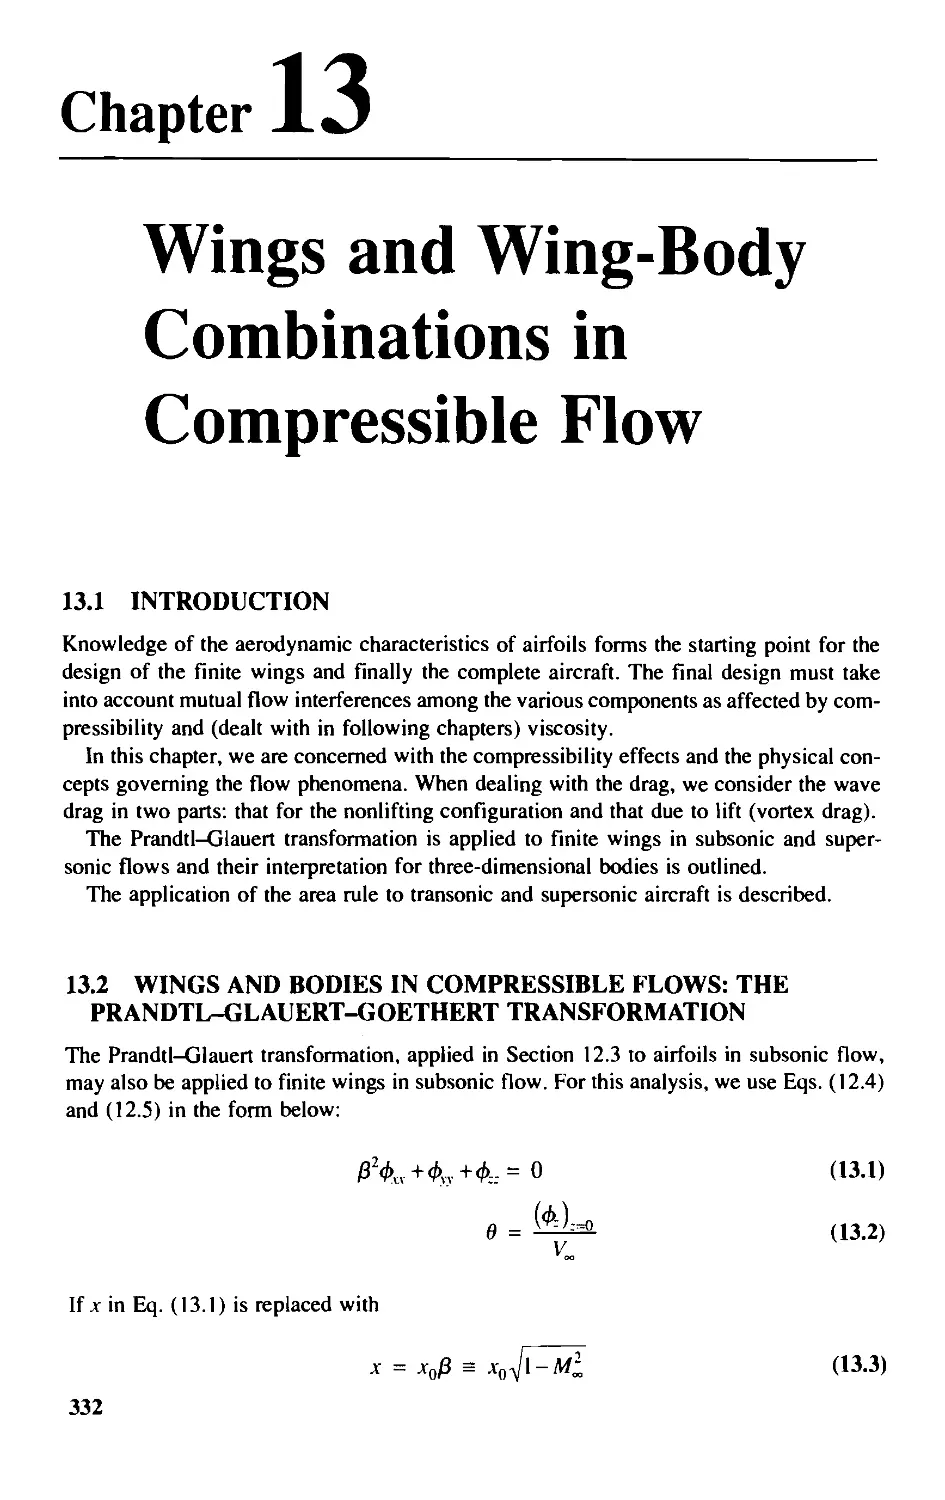 Chapter 13 - Wings and Wing-Body Combinations in Compressible Flow
13.2 - Wings and Bodies in Compressible Flows: The Prandtl-Glauert-Goethert Transformation